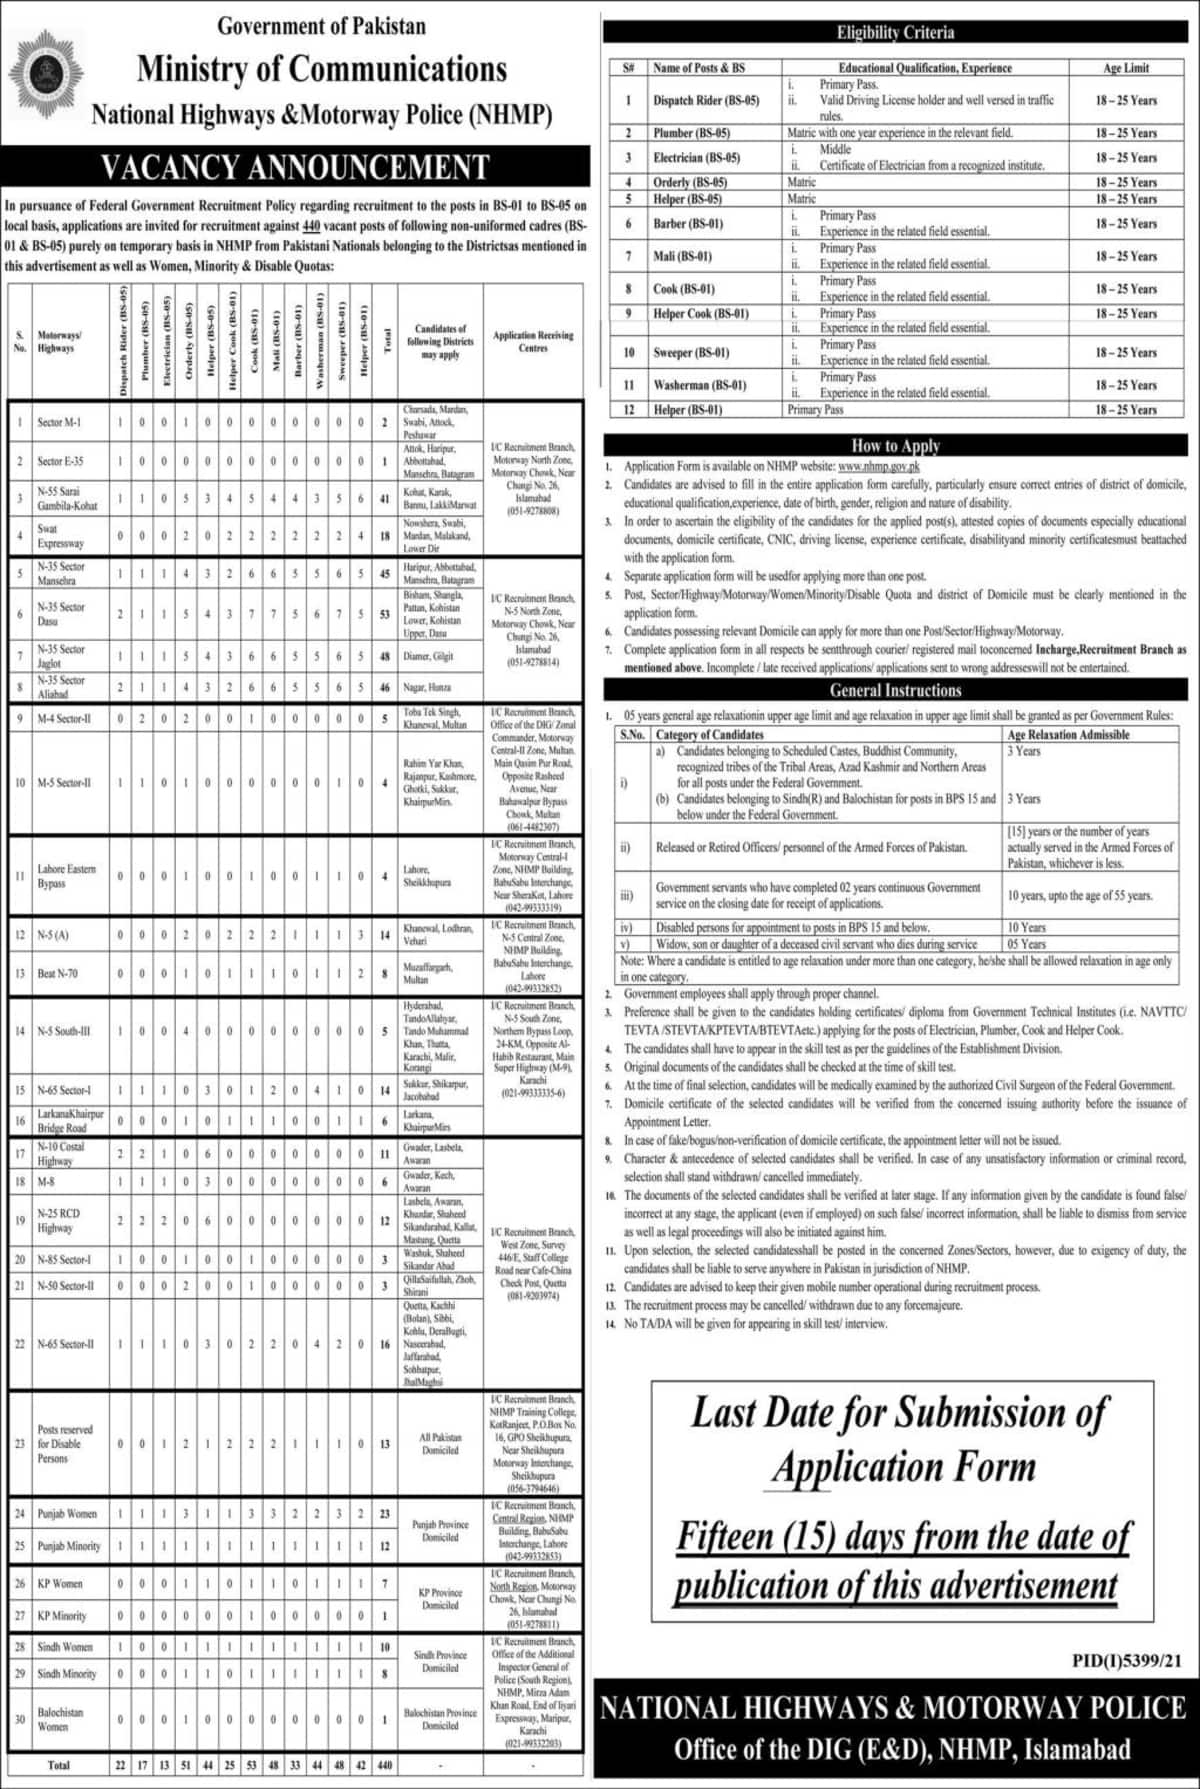 440+ Jobs at National Highway Motorway Police - Latest Advertisement of Highway police Jobs - Application Form Download 2022